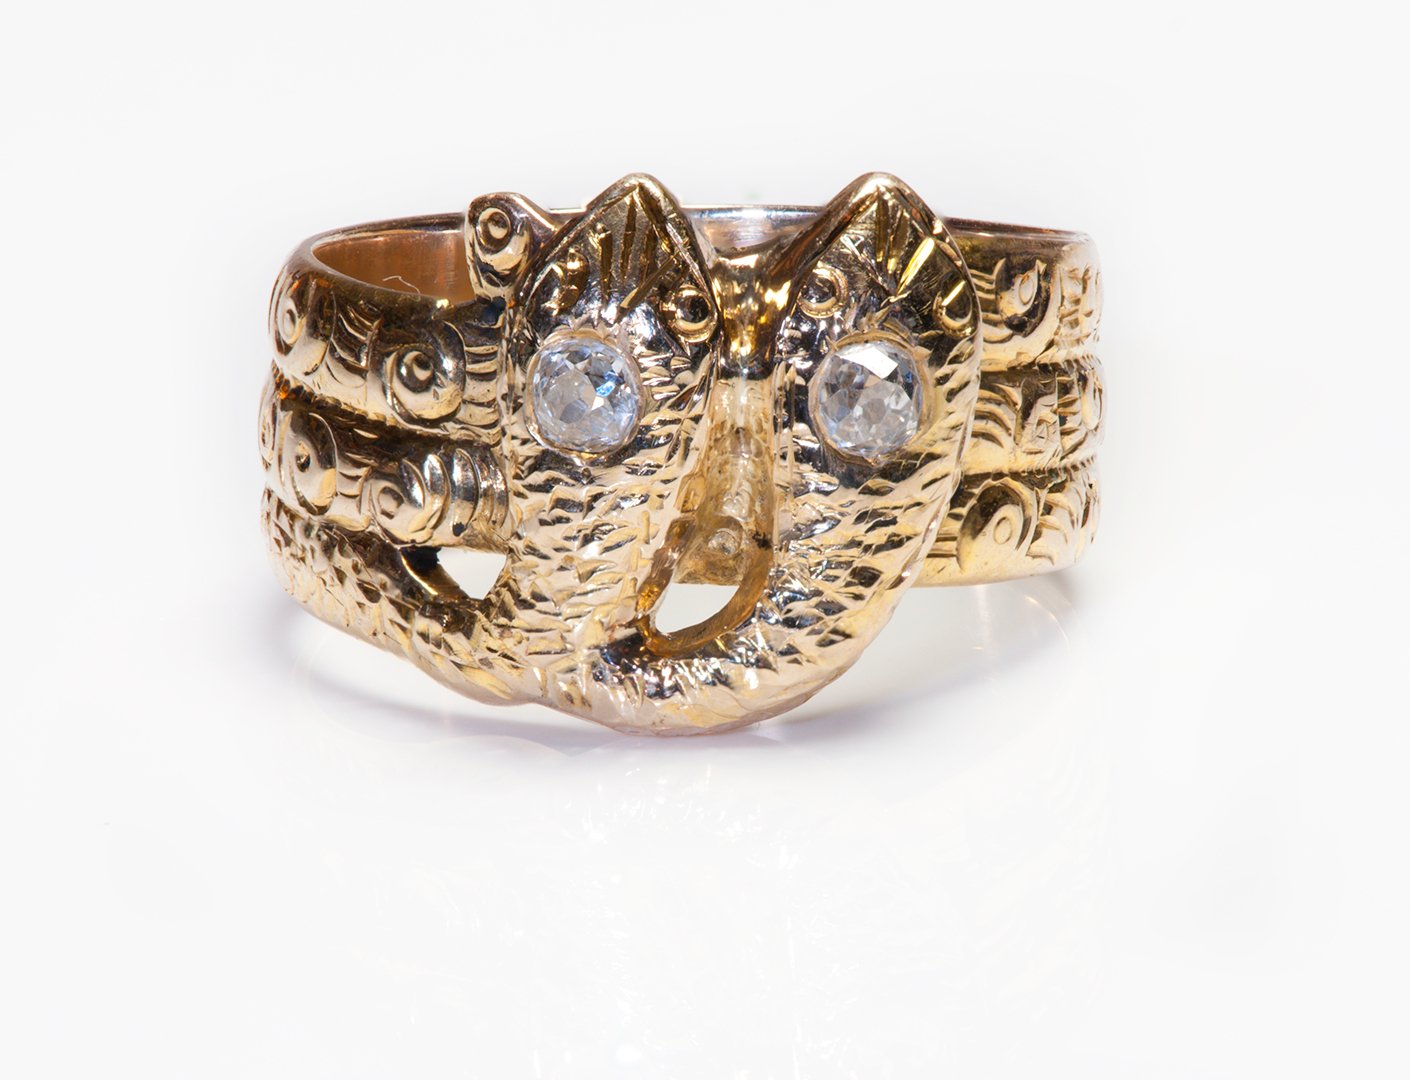 Antique Gold Old Mine Cut Diamond Snake Ring - DSF Antique Jewelry